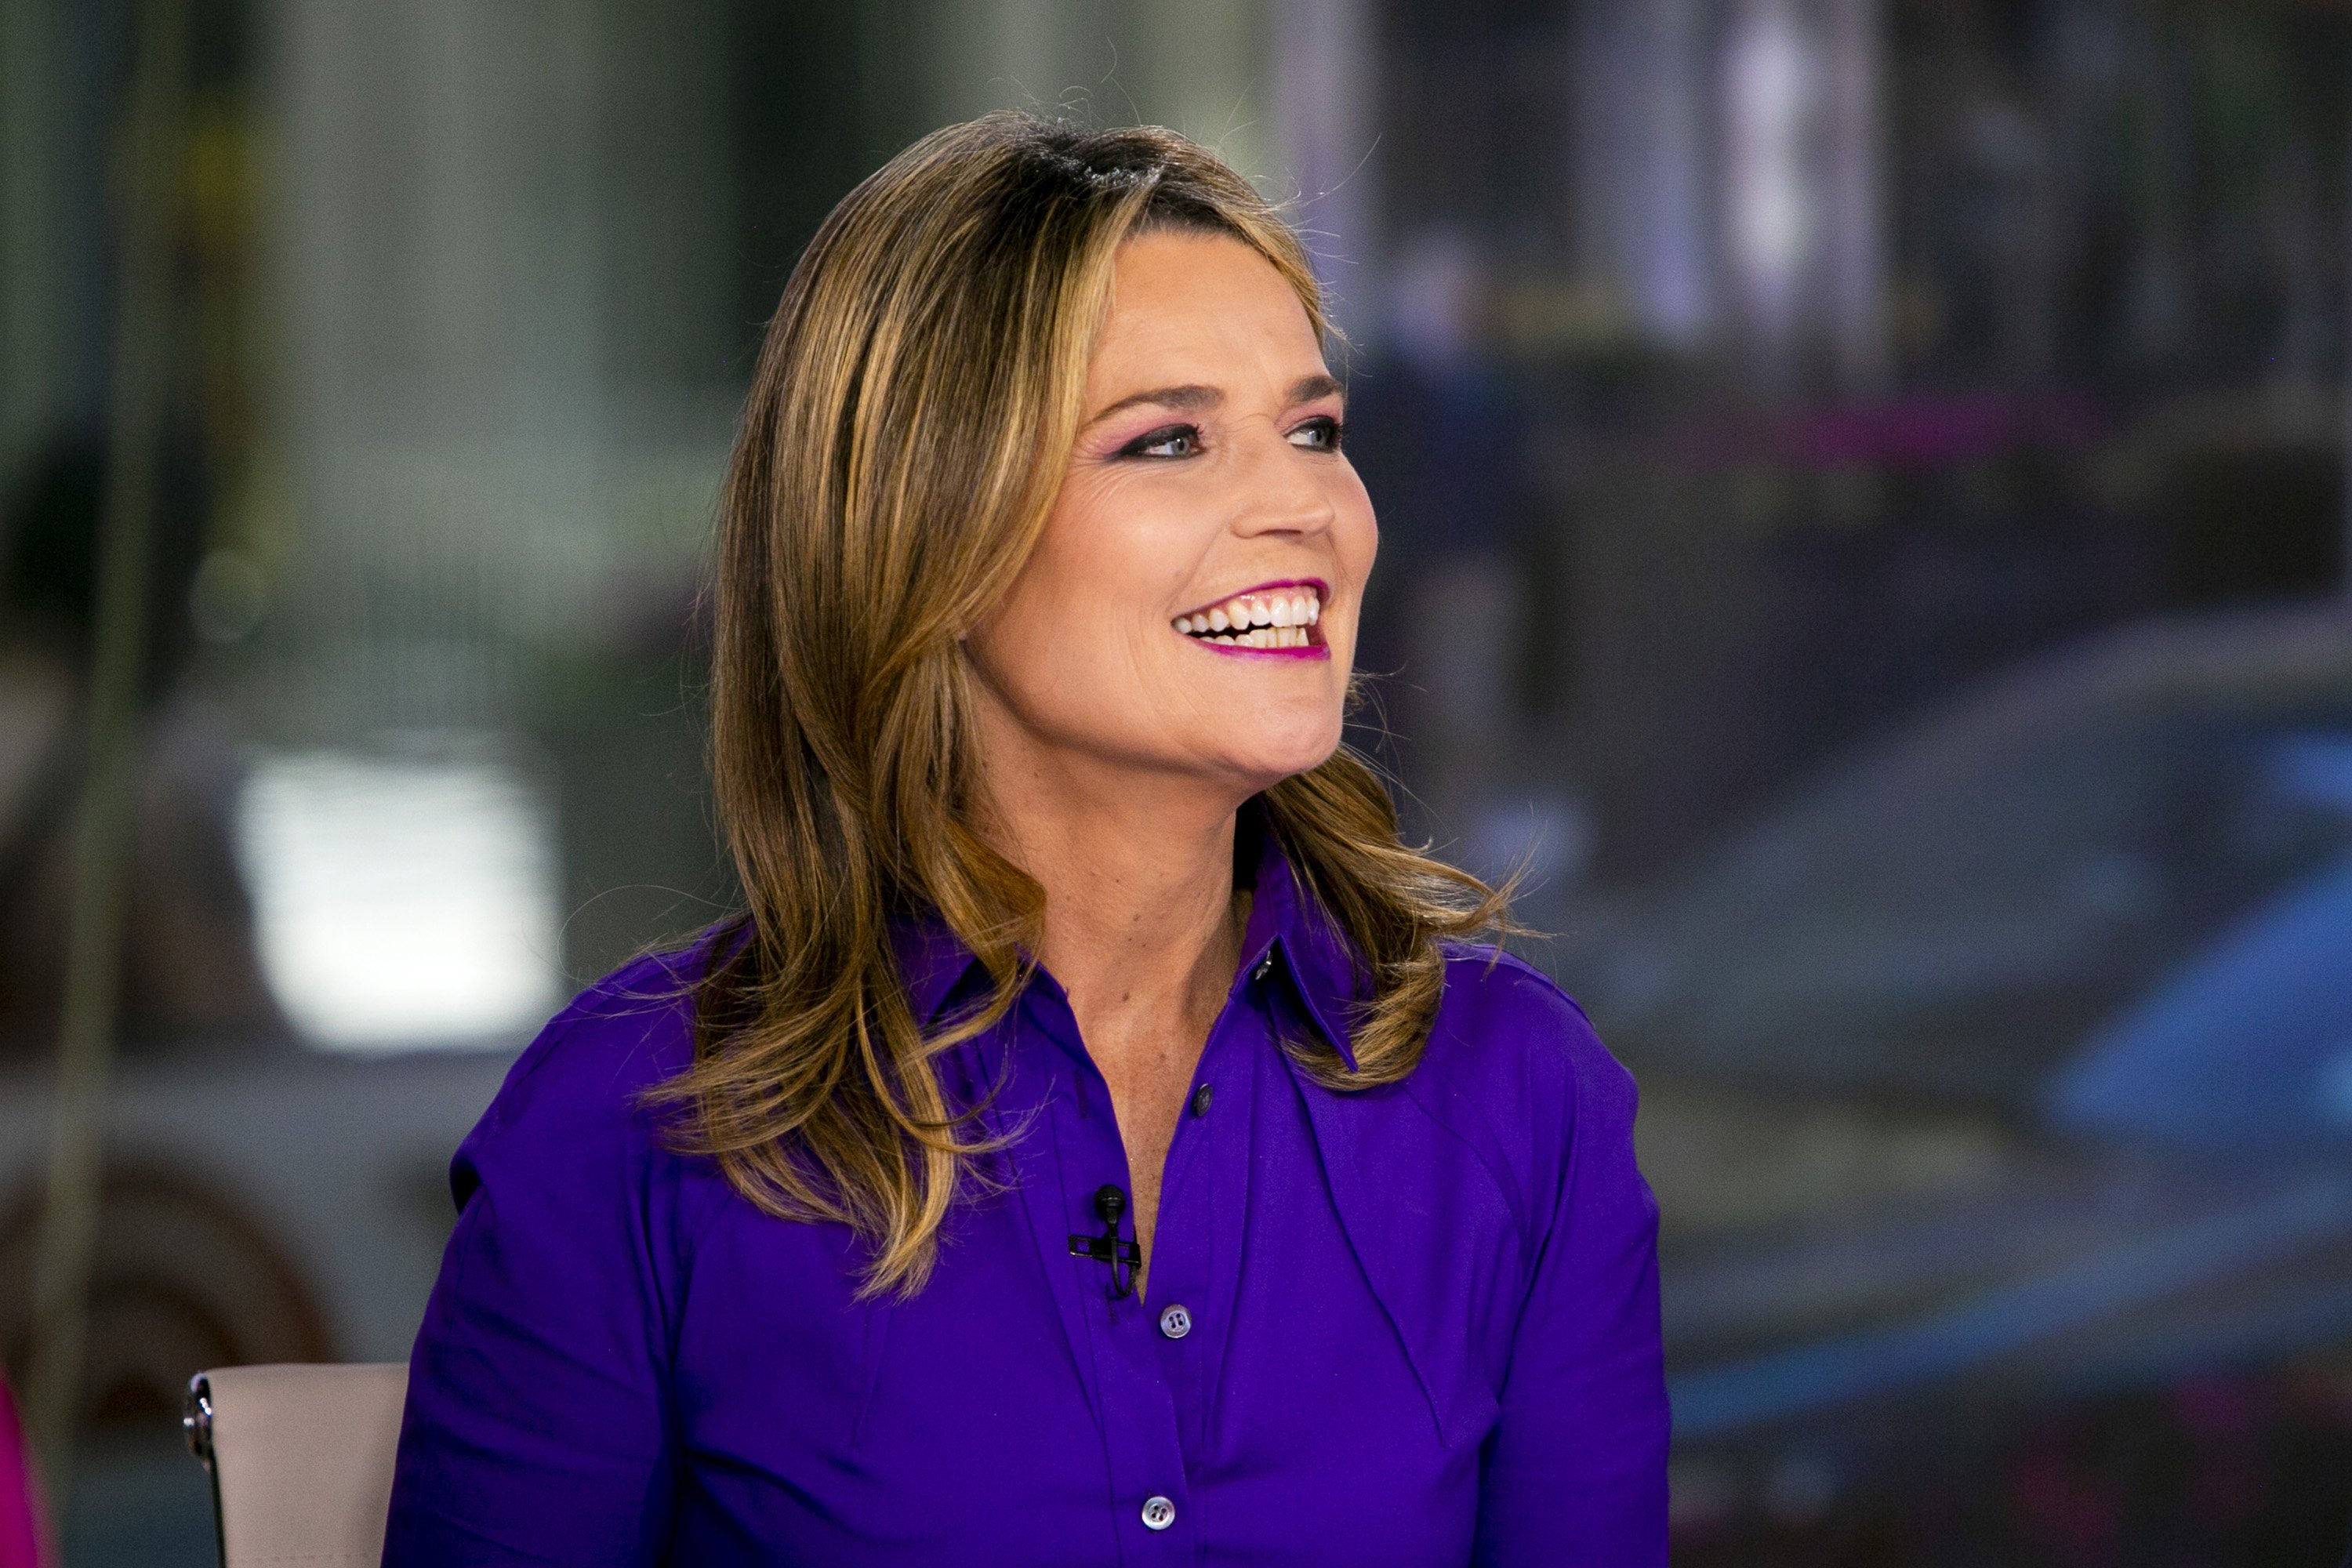 Savannah Guthrie on "TODAY," Wednesday, May 15, 2019 -- | Photo by Zach Pagano/NBCU Photo Bank/NBCUniversal via Getty Images